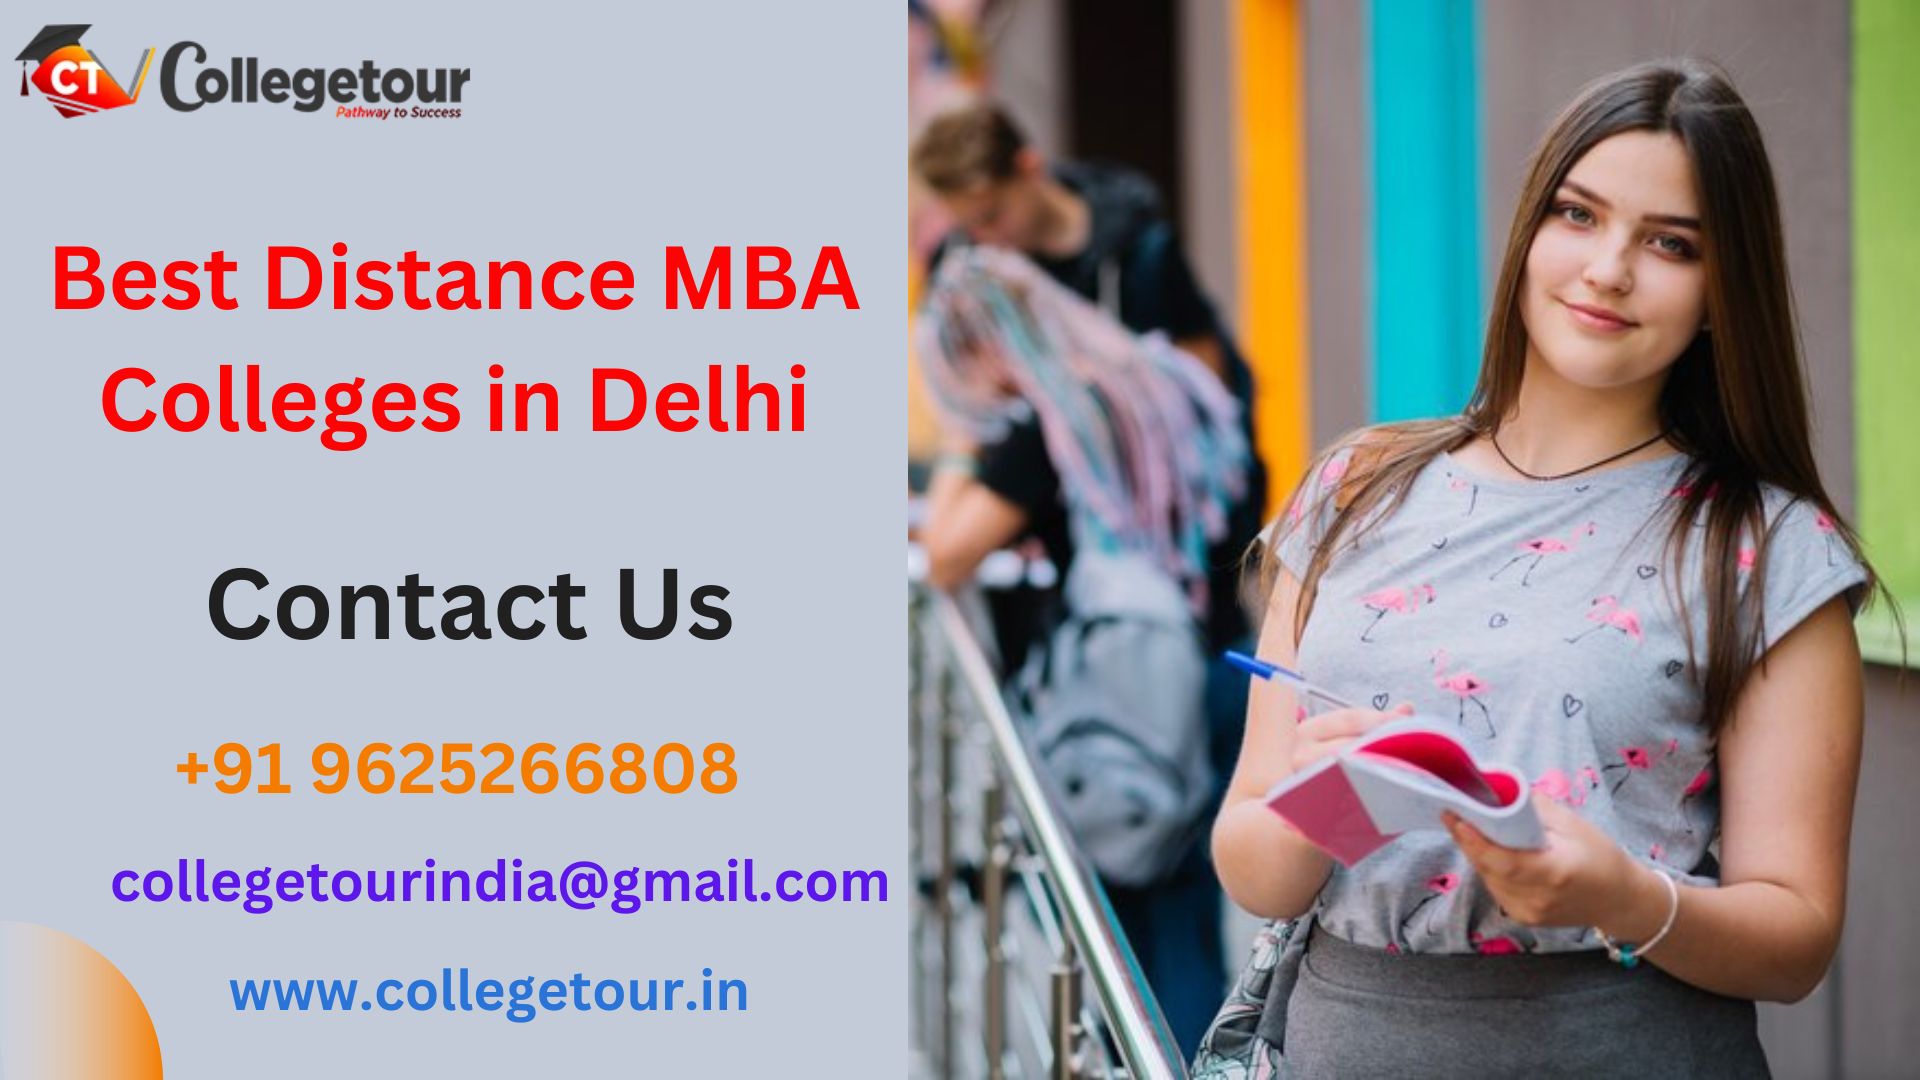 Best Distance MBA Colleges in Delhi